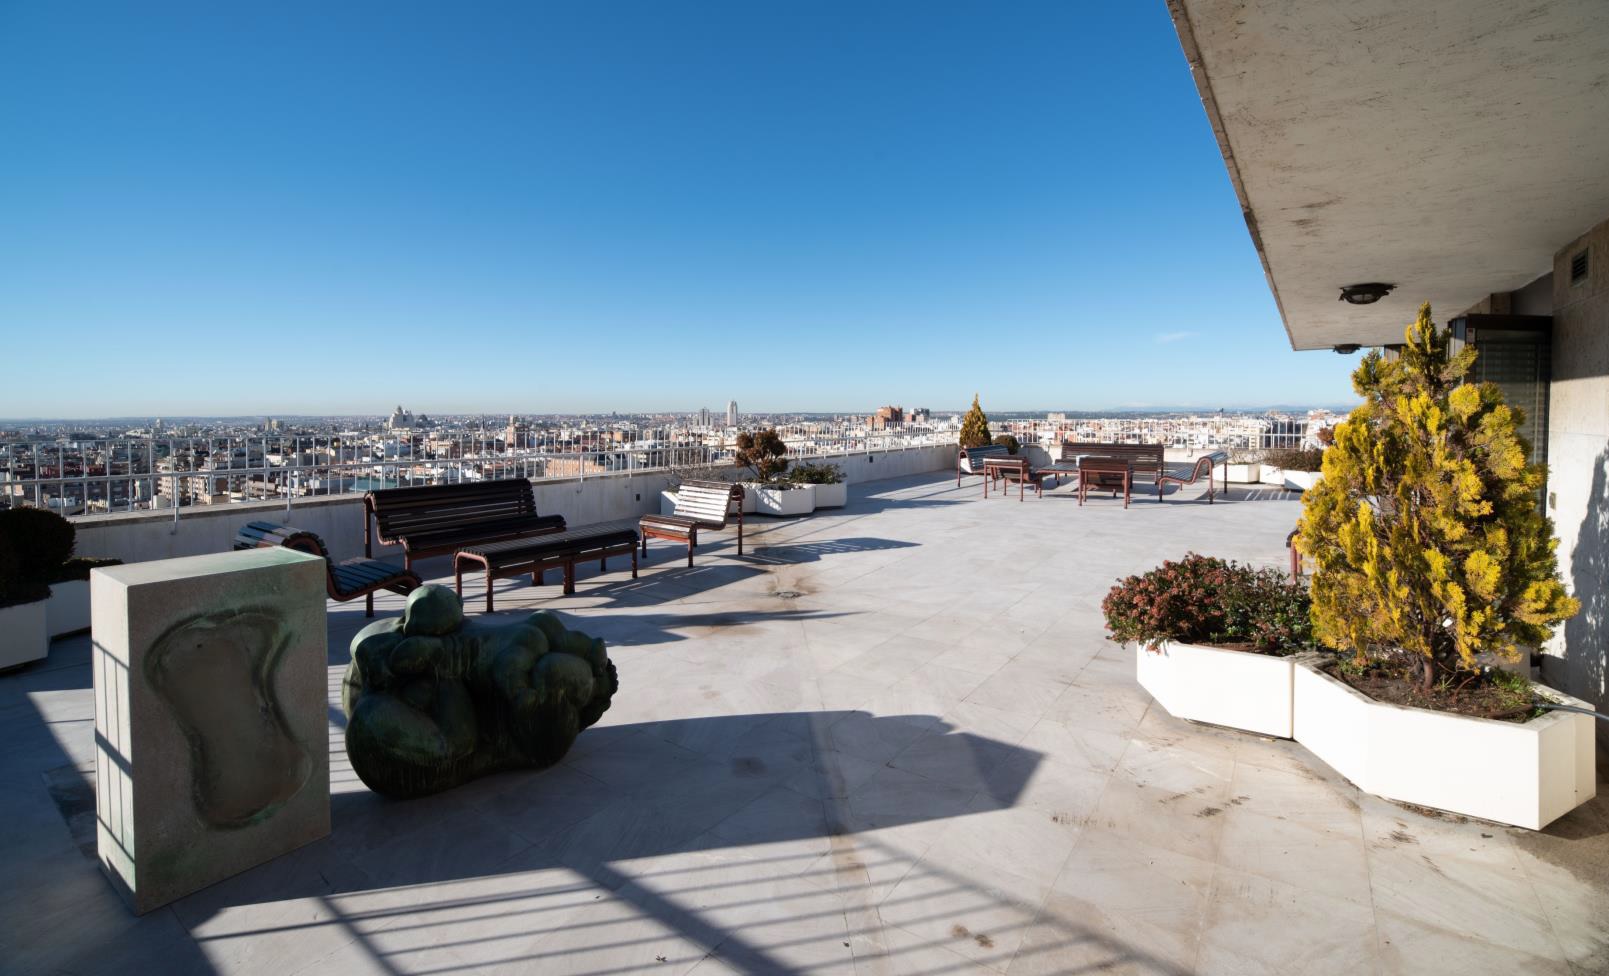  Exclusive penthouse with unique views of Madrid